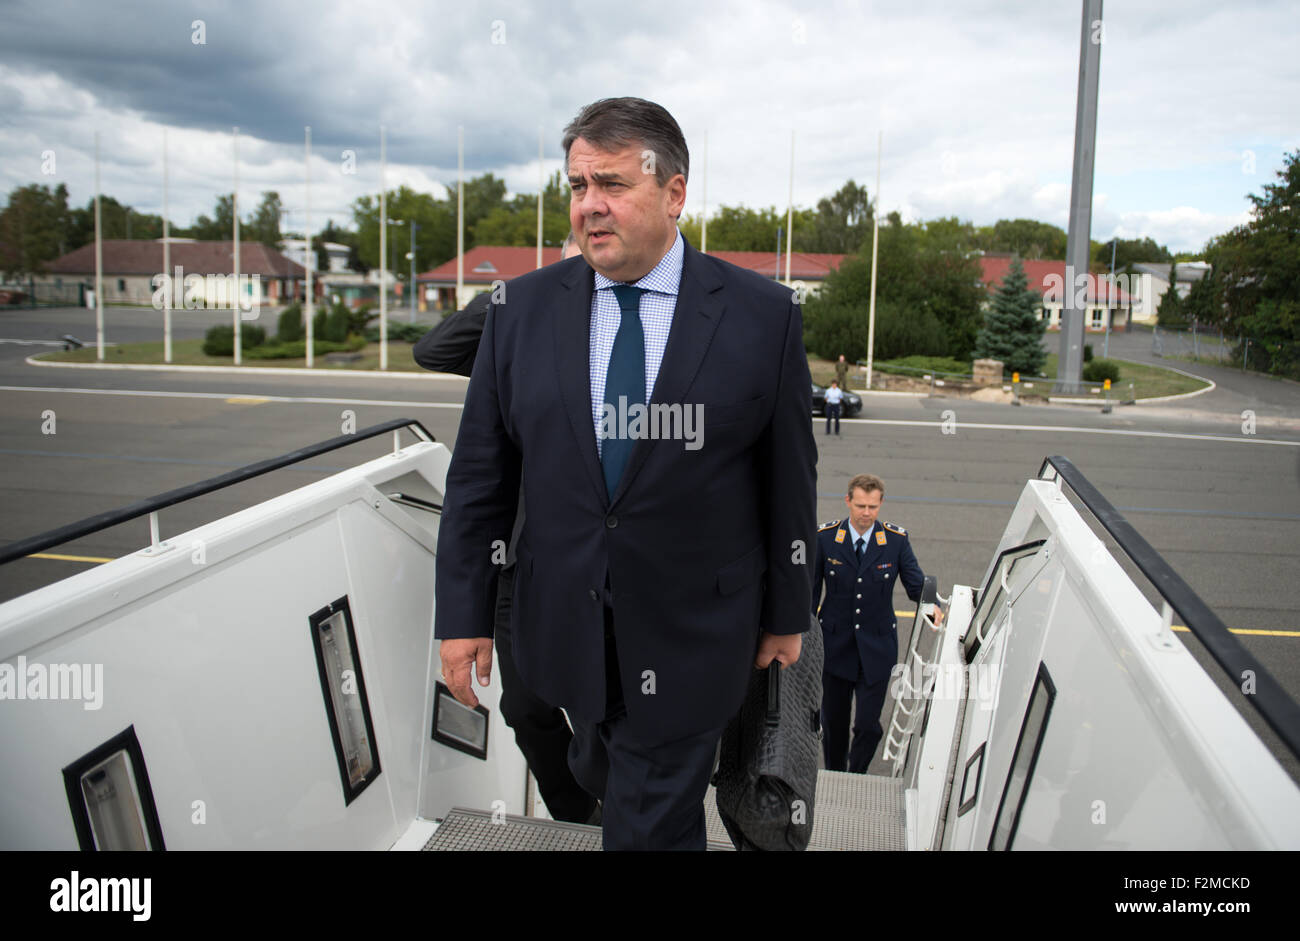 Berlin, Germany. 21st Sep, 2015. German Economy Minister Sigmar Gabriel boards a plane headed to Amman, Jordan, at Tegel Airport in Berlin, Germany, 21 September 2015. Gabriel will be briefed on the situation of the many migrants from Syria currently seeking refuge in Jordan during his two-day visit to the country. Photo: BERND VON JUTRCZENKA/dpa/Alamy Live News Stock Photo